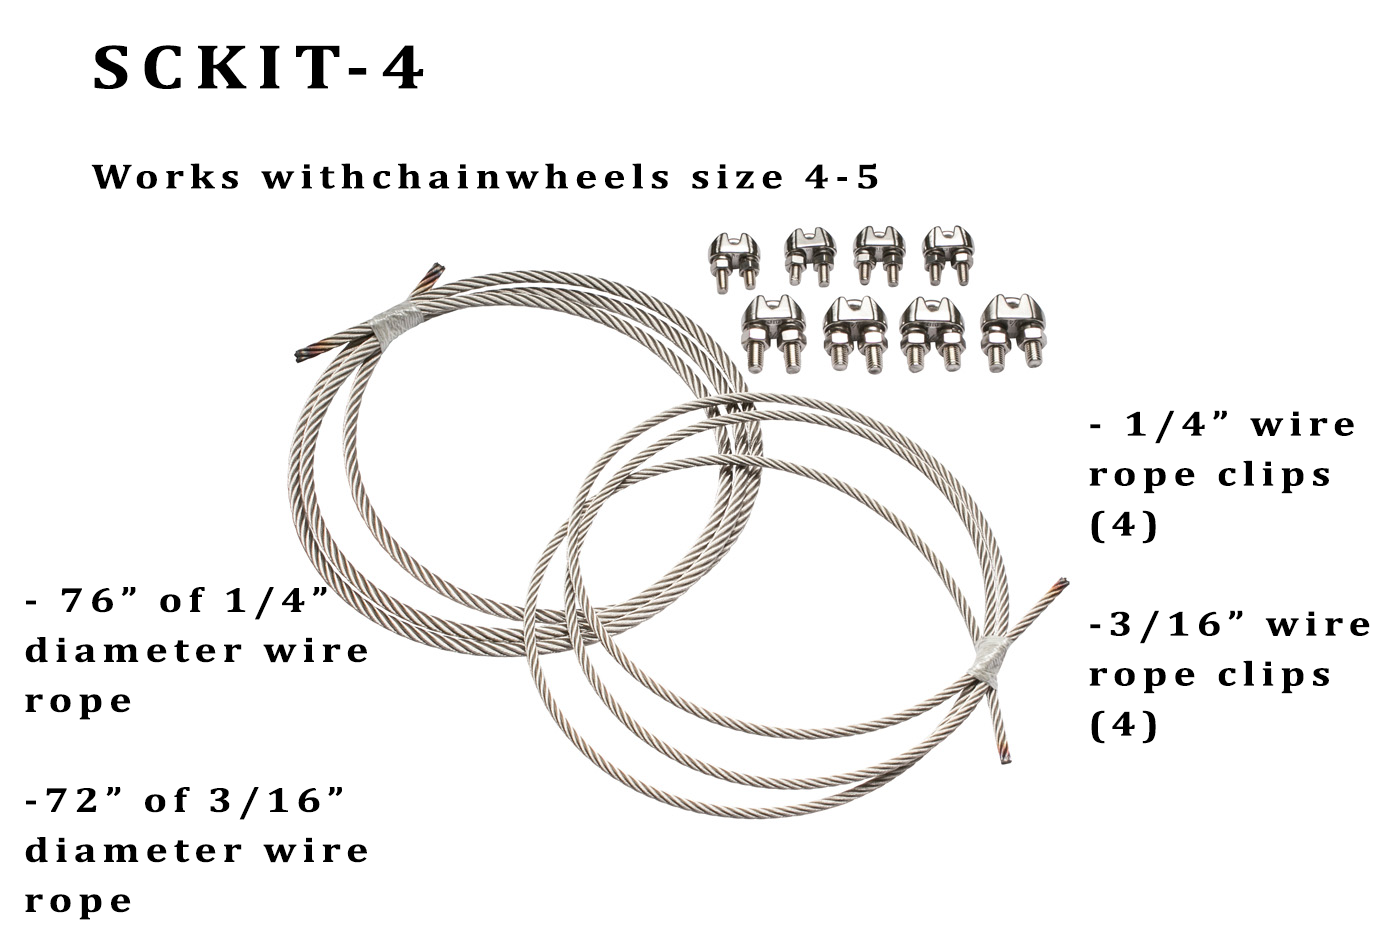 Details about   Babbitt SCKIT-4 Safety Cable Kit For Sizes 4-5